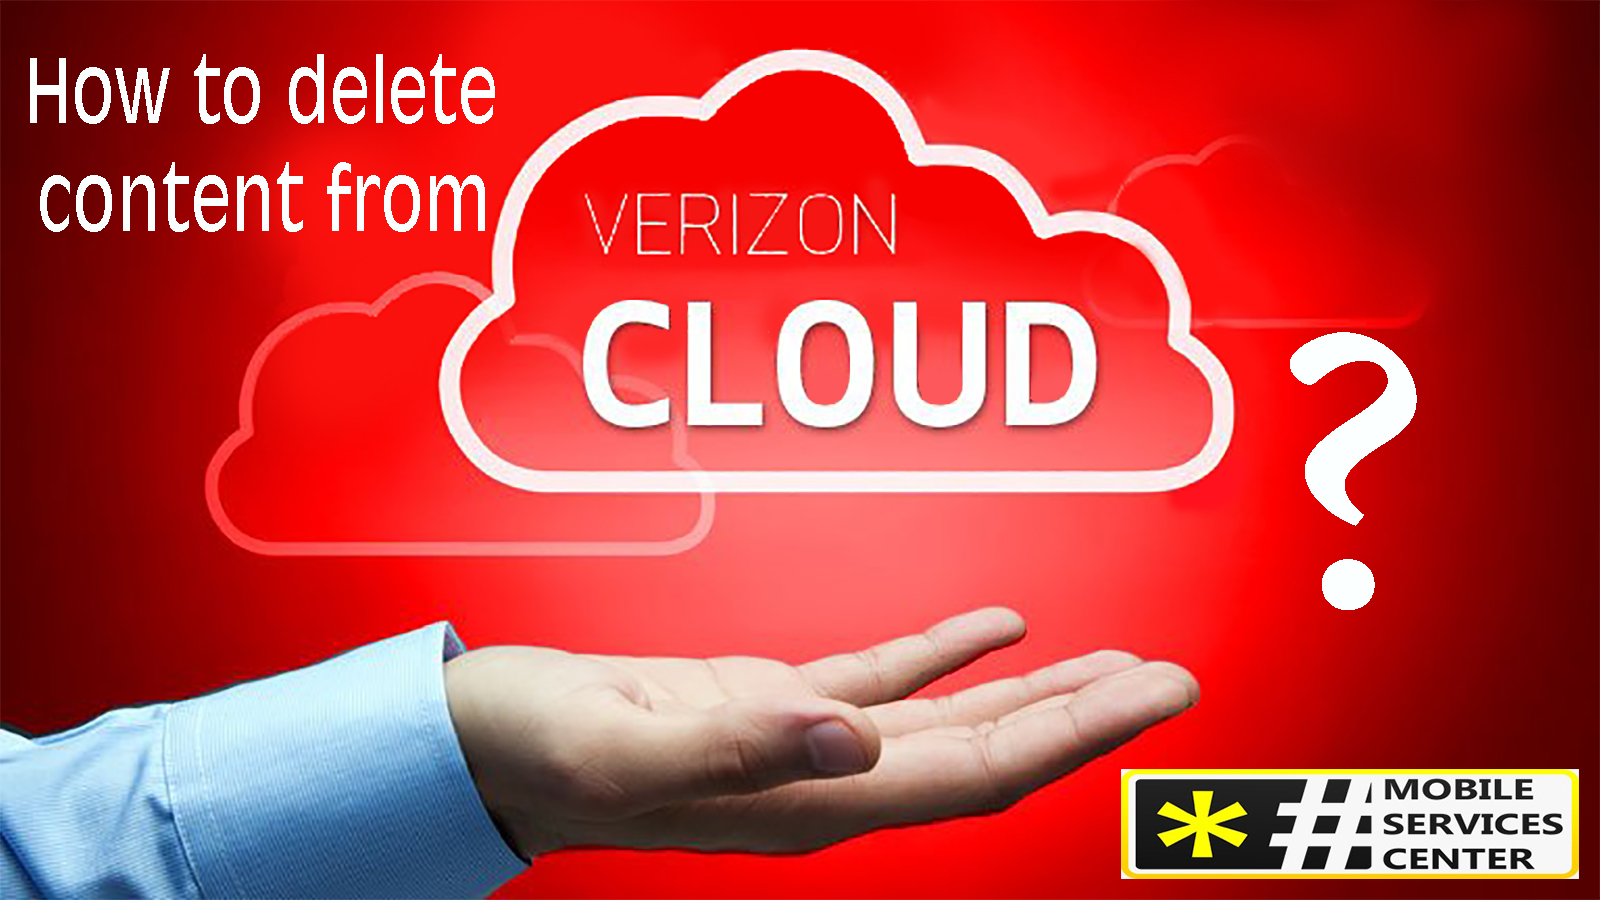 How to delete content from Verizon cloud